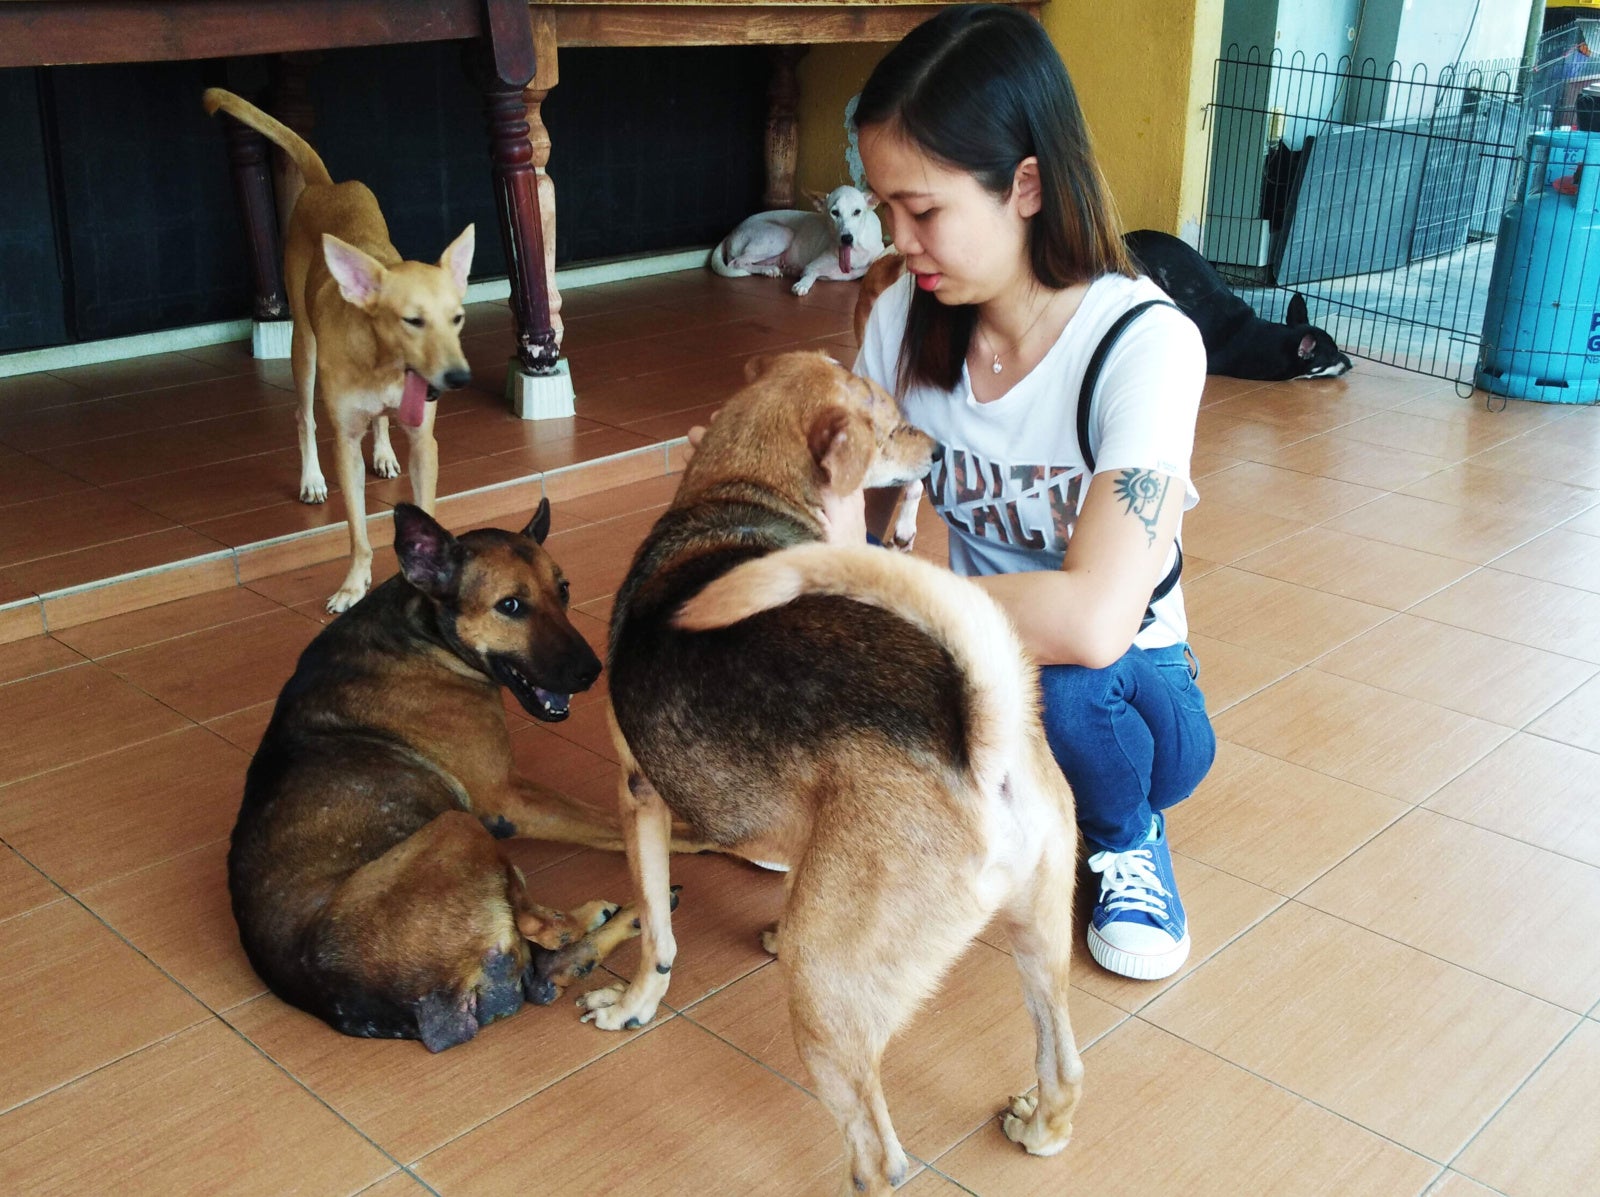 This M'sian Dog Shelter Currently Cares for 200 Dogs, and This Is How They Do It - WORLD OF BUZZ 3